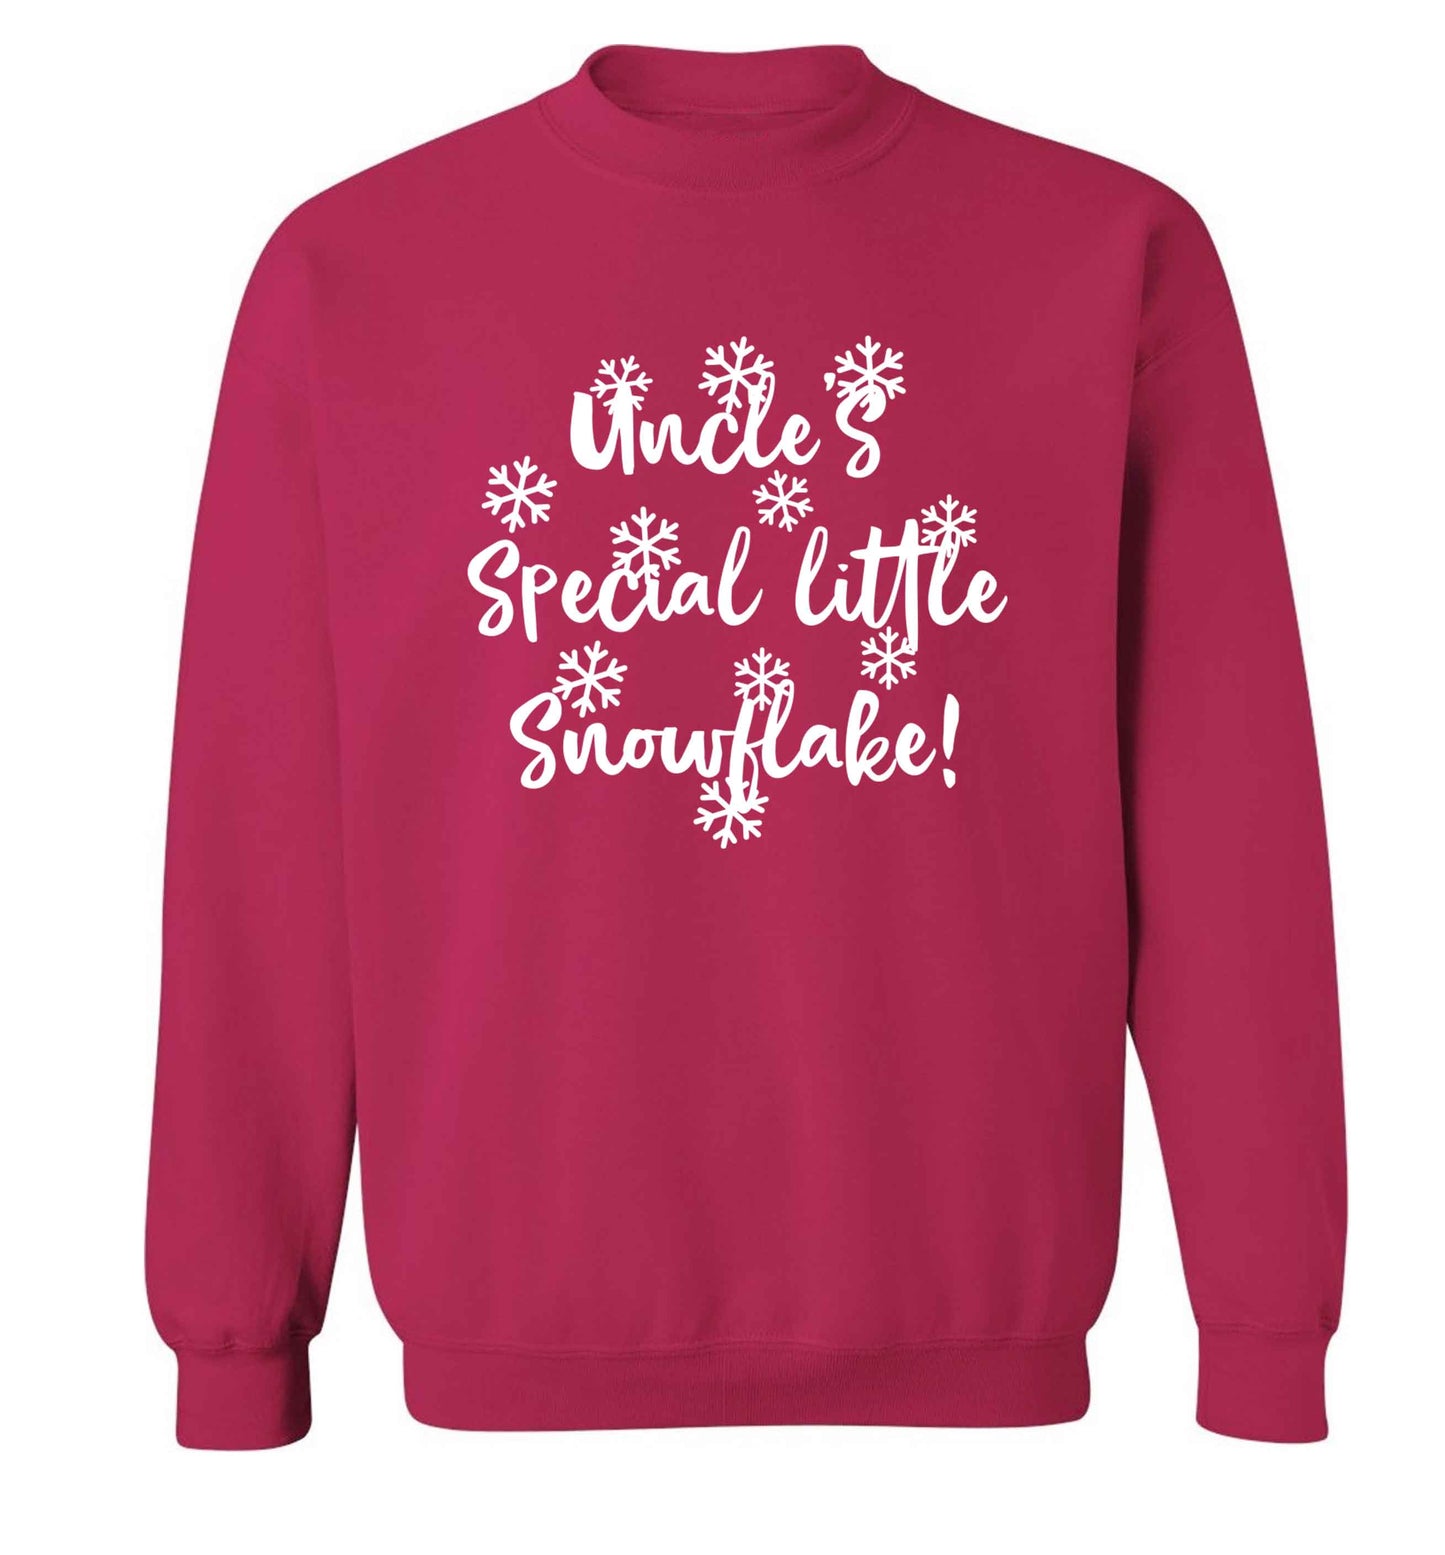 Uncle's special little snowflake Adult's unisex pink Sweater 2XL